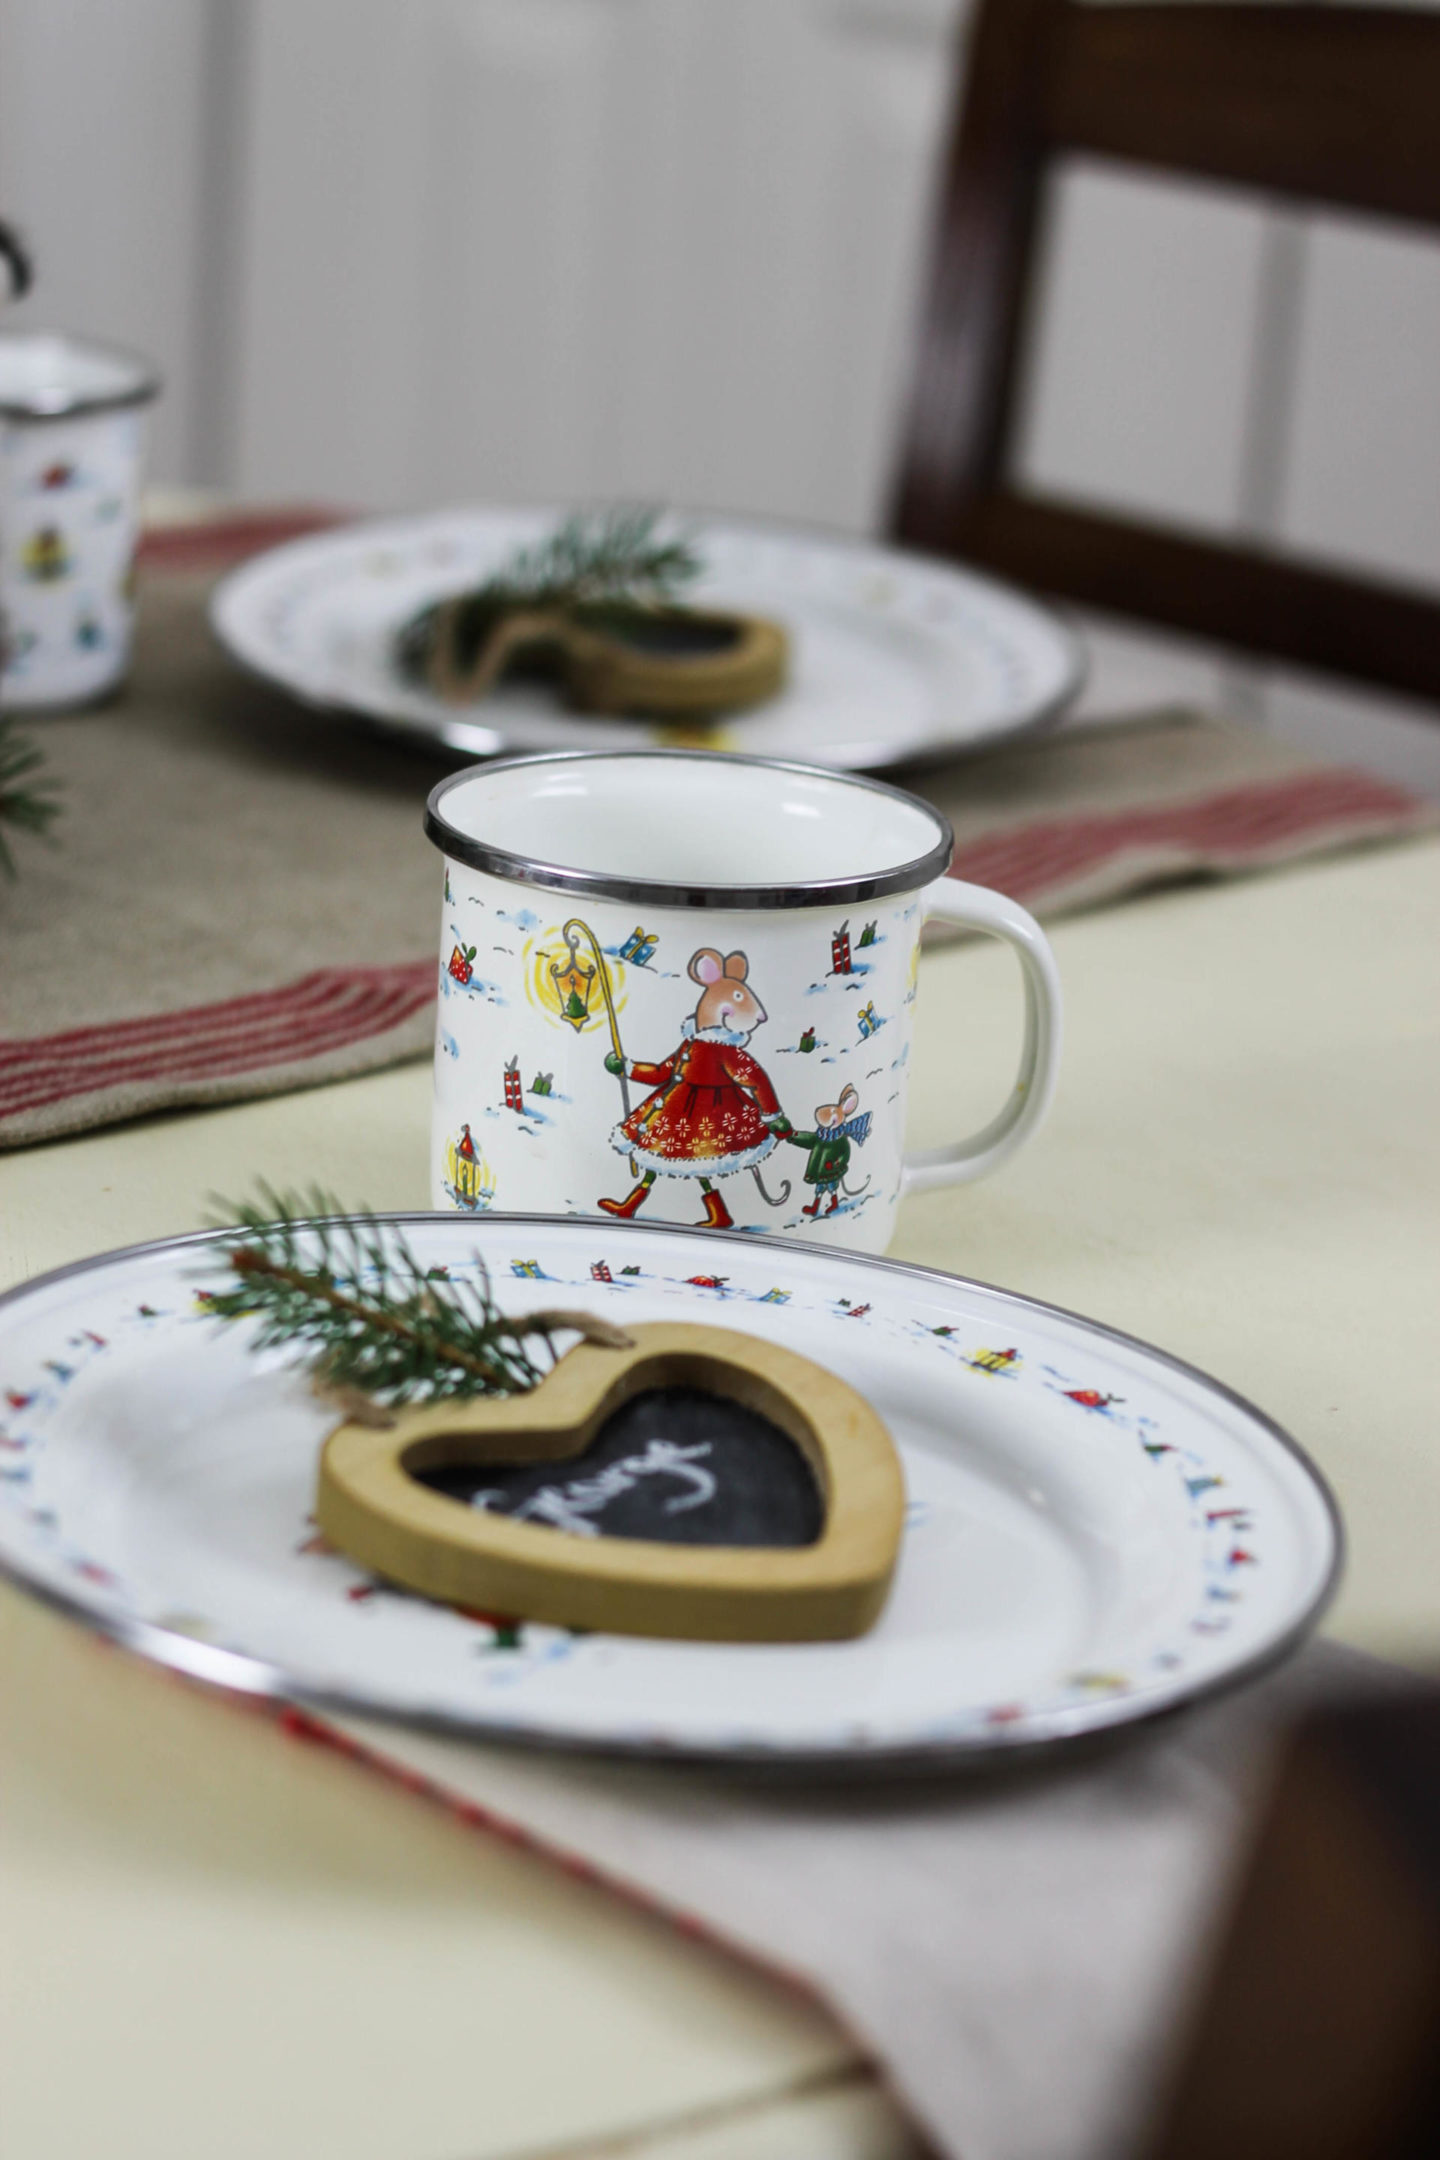 Easy Children's Christmas Tablescape With World Market by New York lifestyle blogger Style Waltz